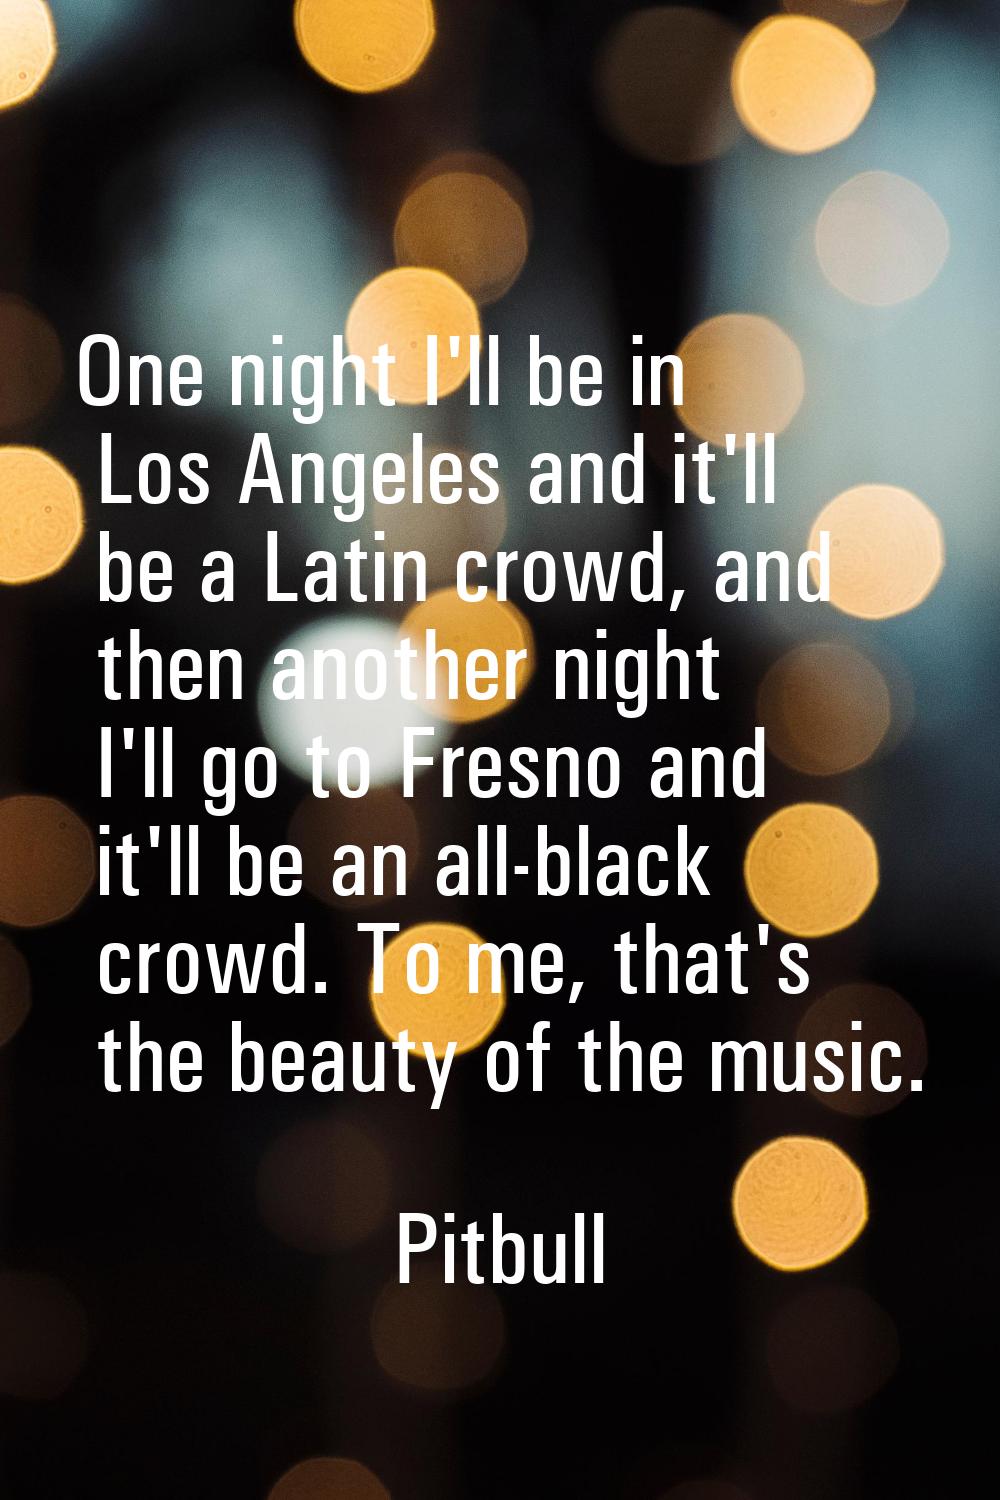 One night I'll be in Los Angeles and it'll be a Latin crowd, and then another night I'll go to Fres